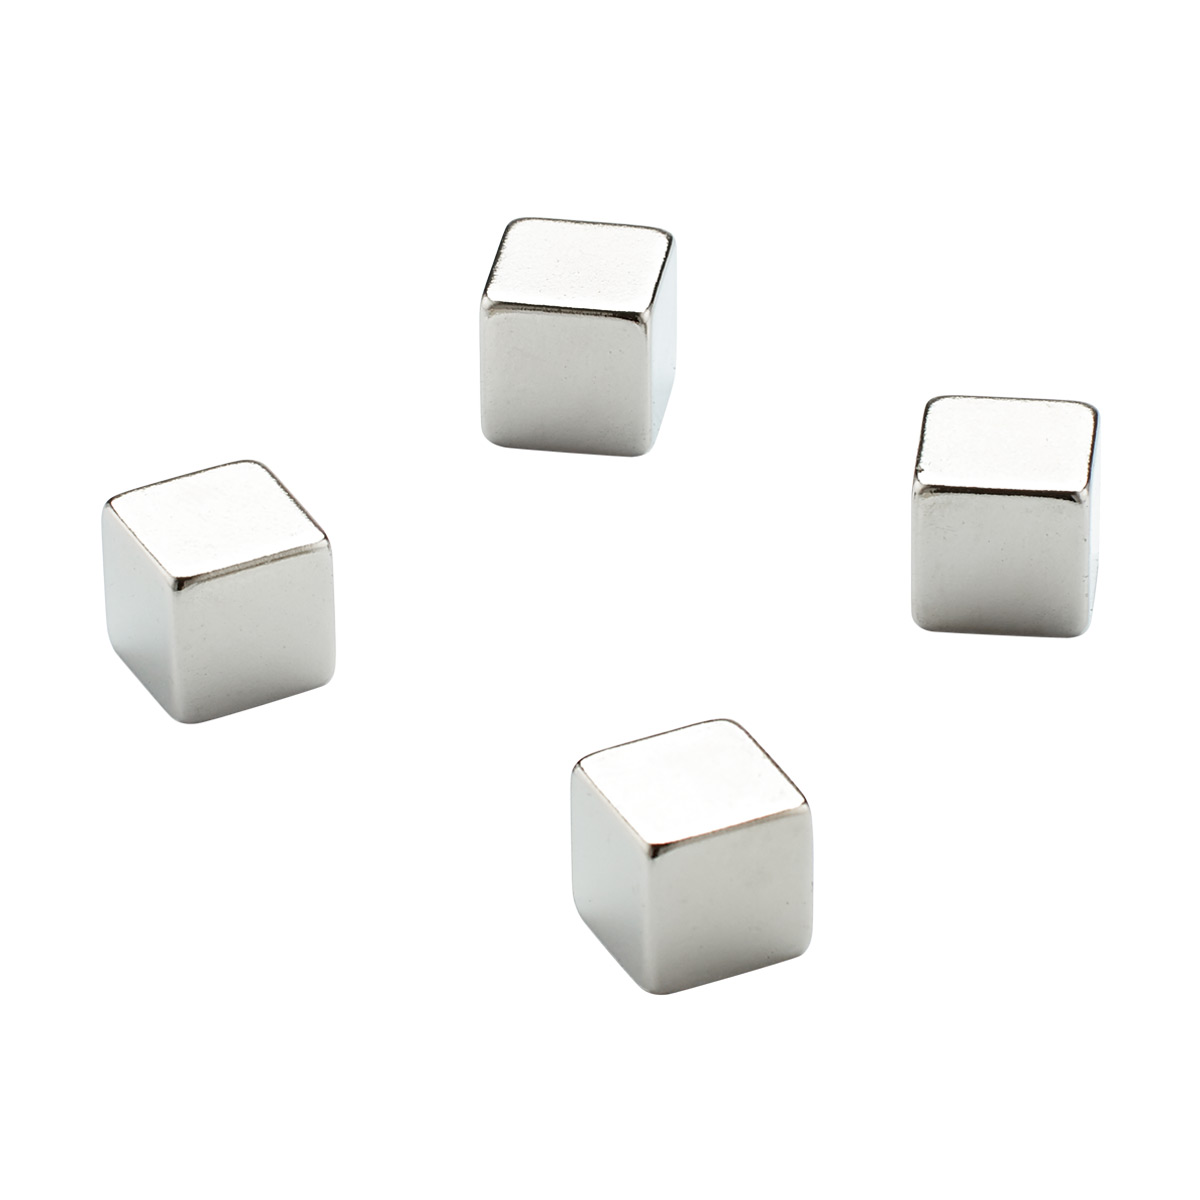 Three by Three Cube Mighties Magnets, Golden (12-Pack)